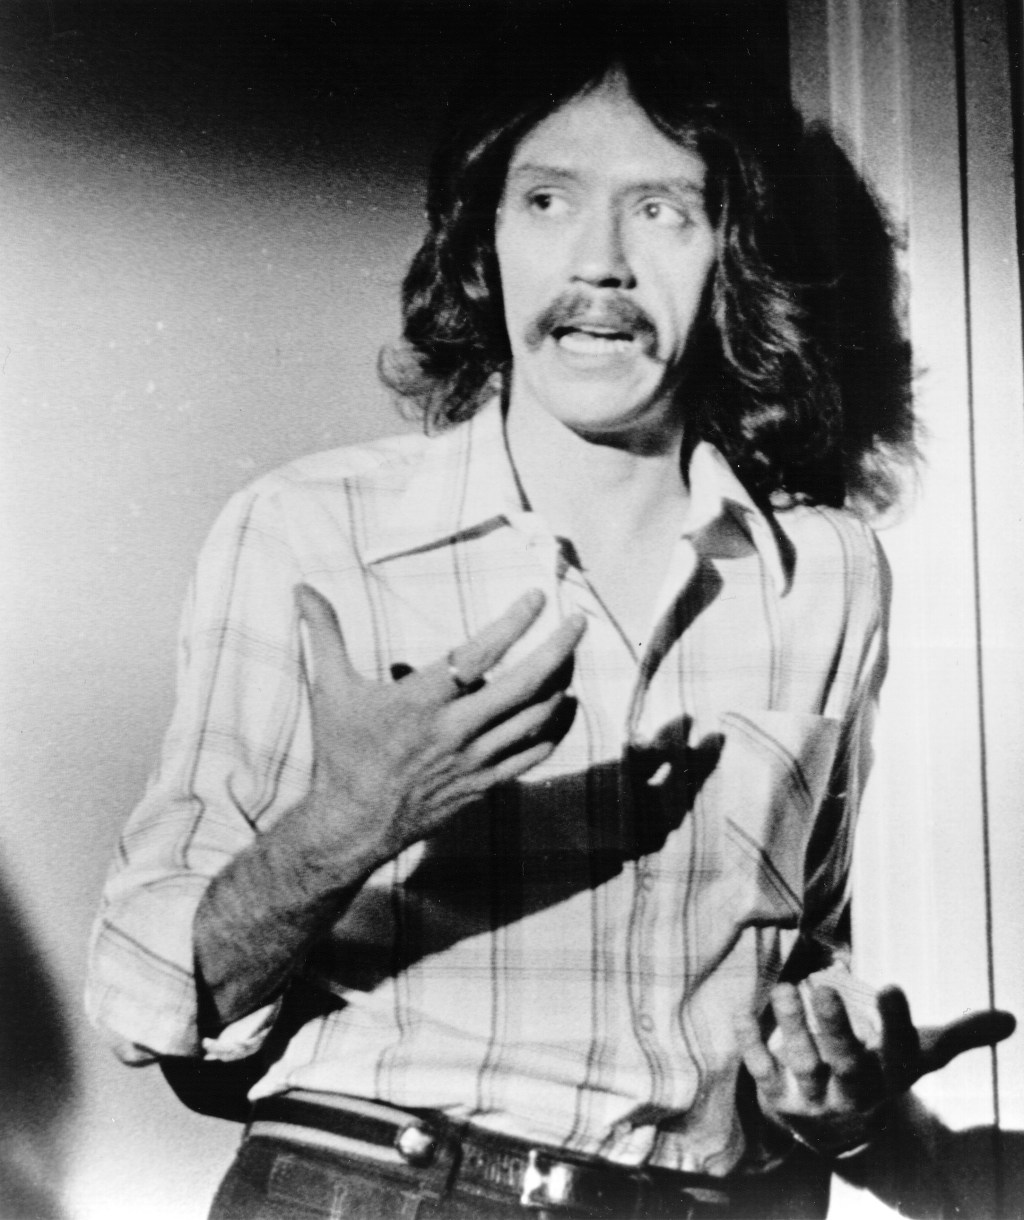 John Carpenter during the production of Halloween (1978)